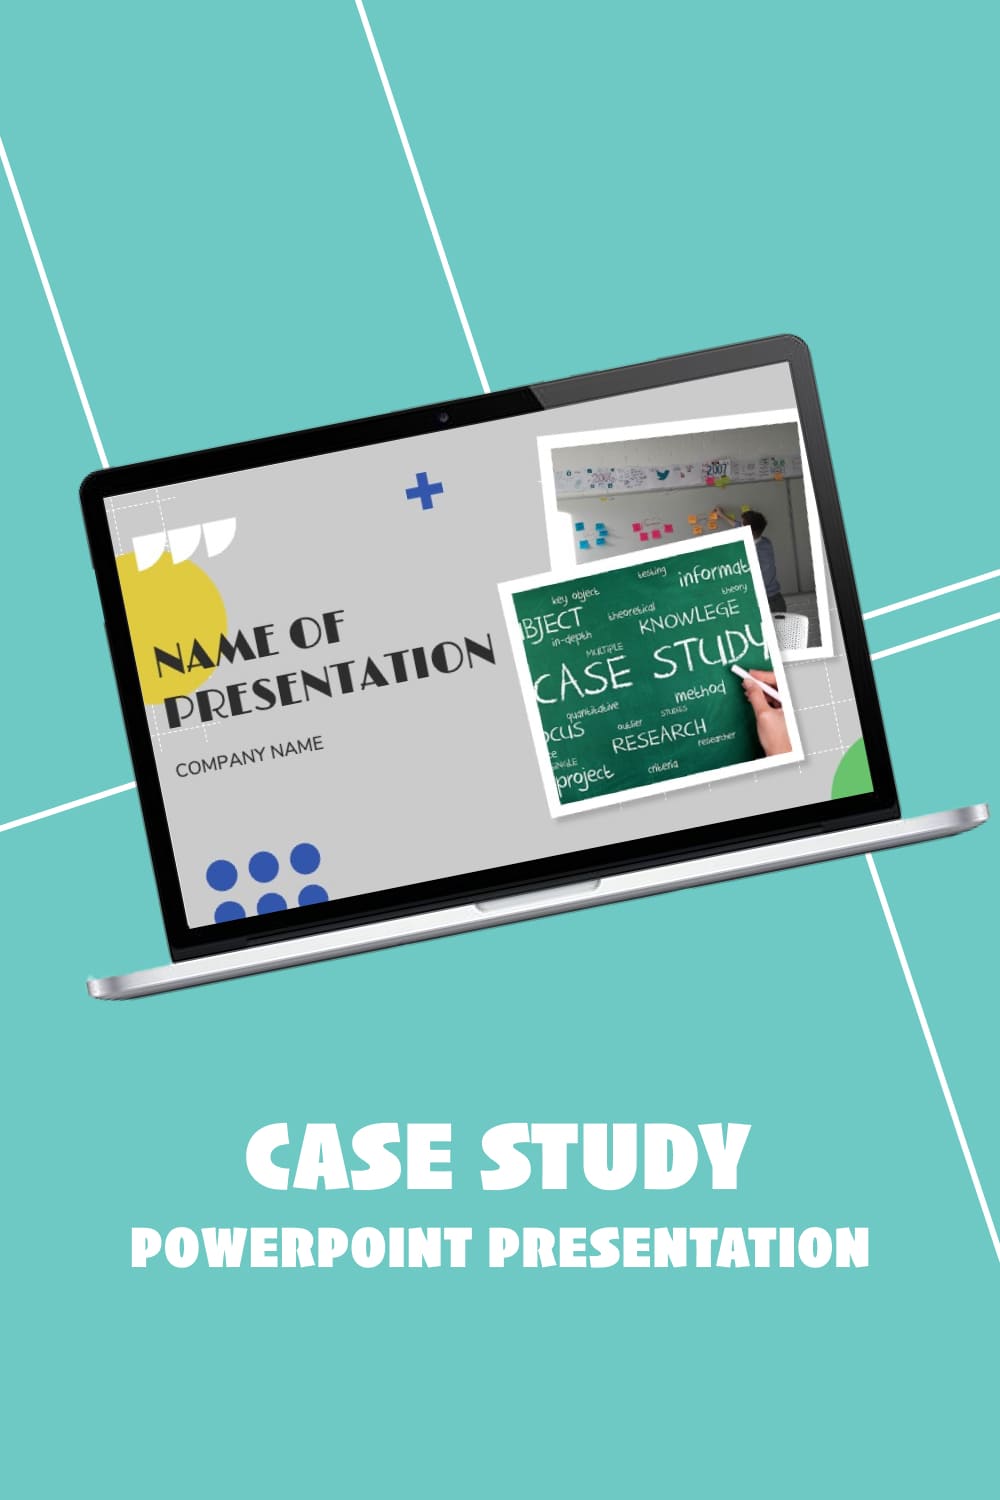 Case study powerpoint presentation - pinterest image preview.